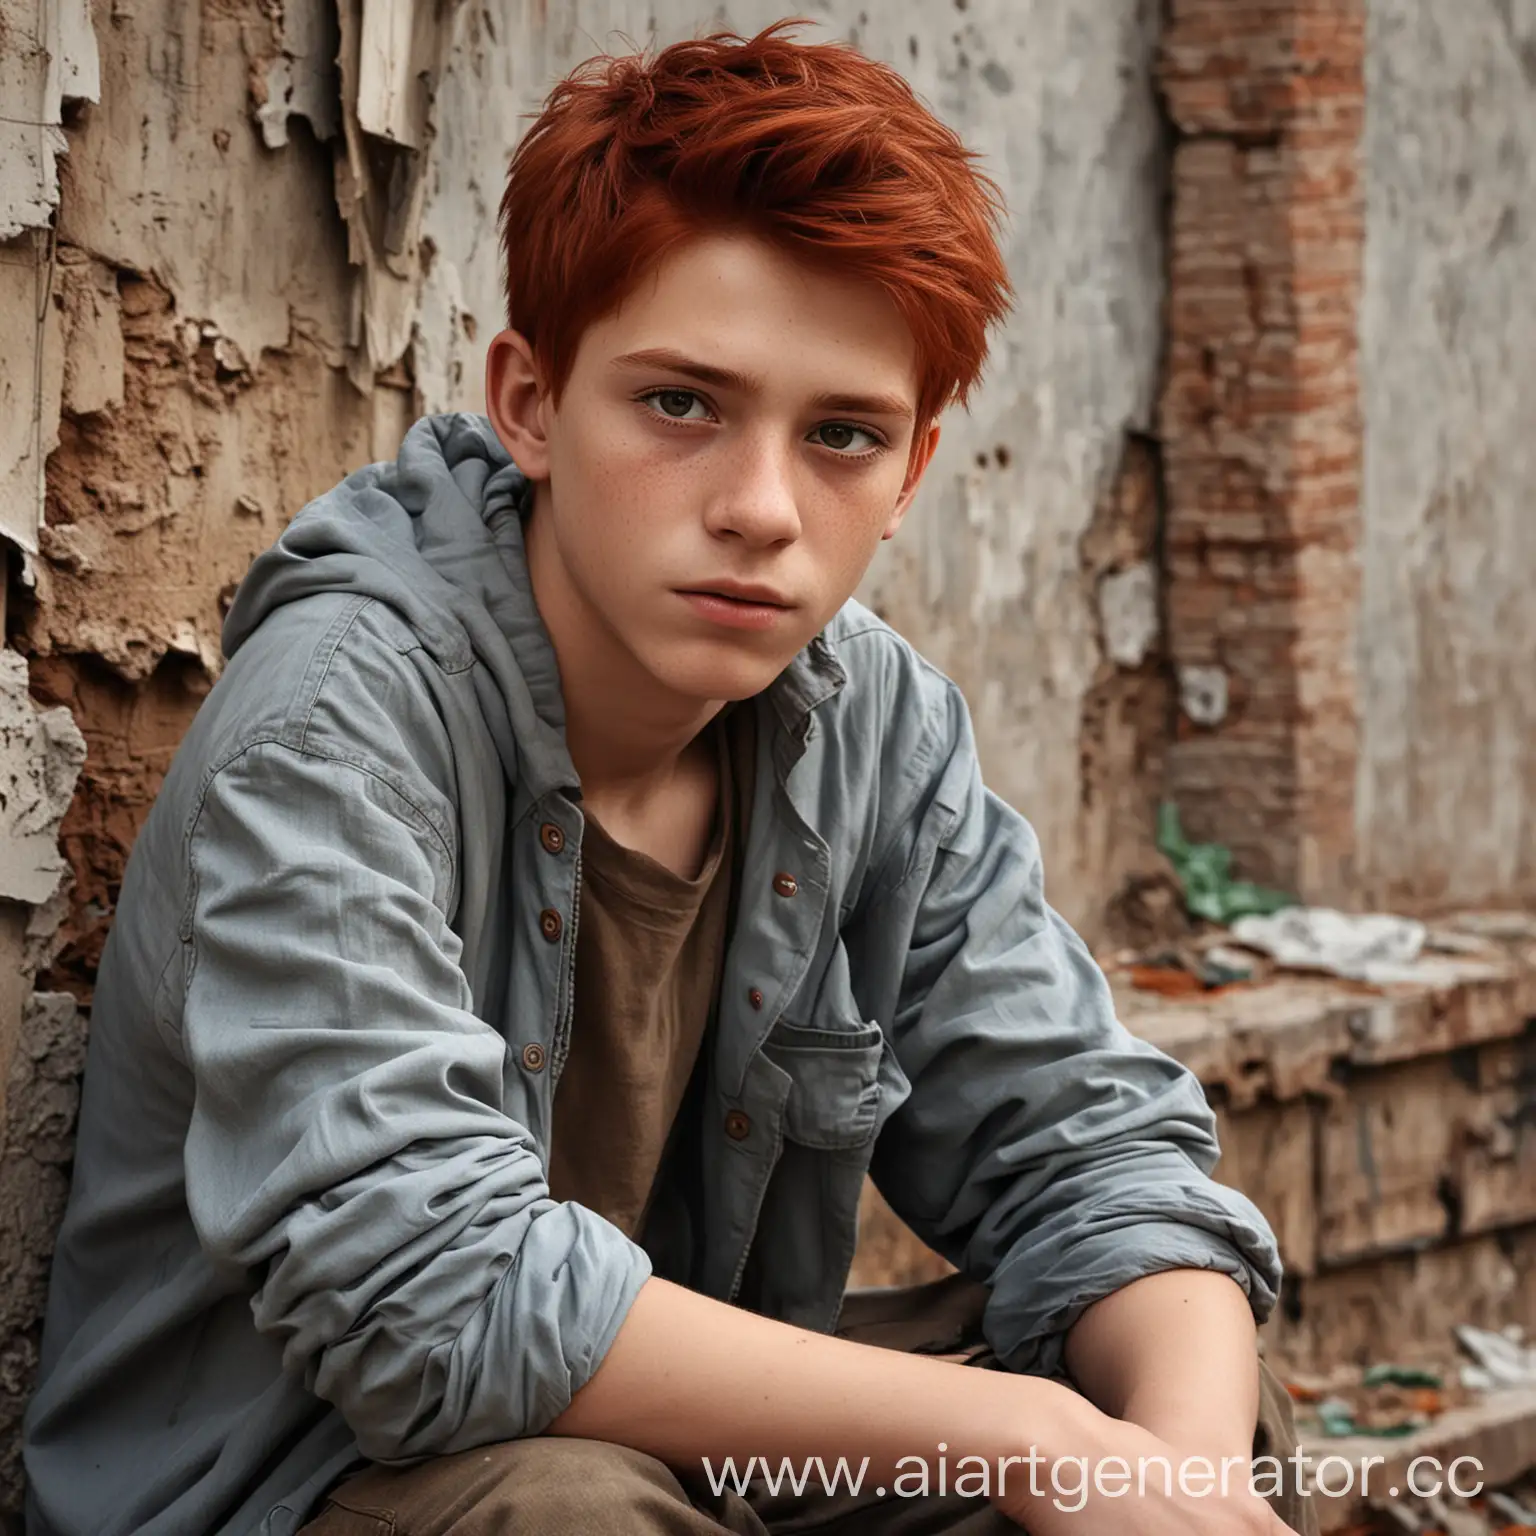 Lonely-RedHaired-Teenage-Boy-Sitting-in-Abandoned-Classroom